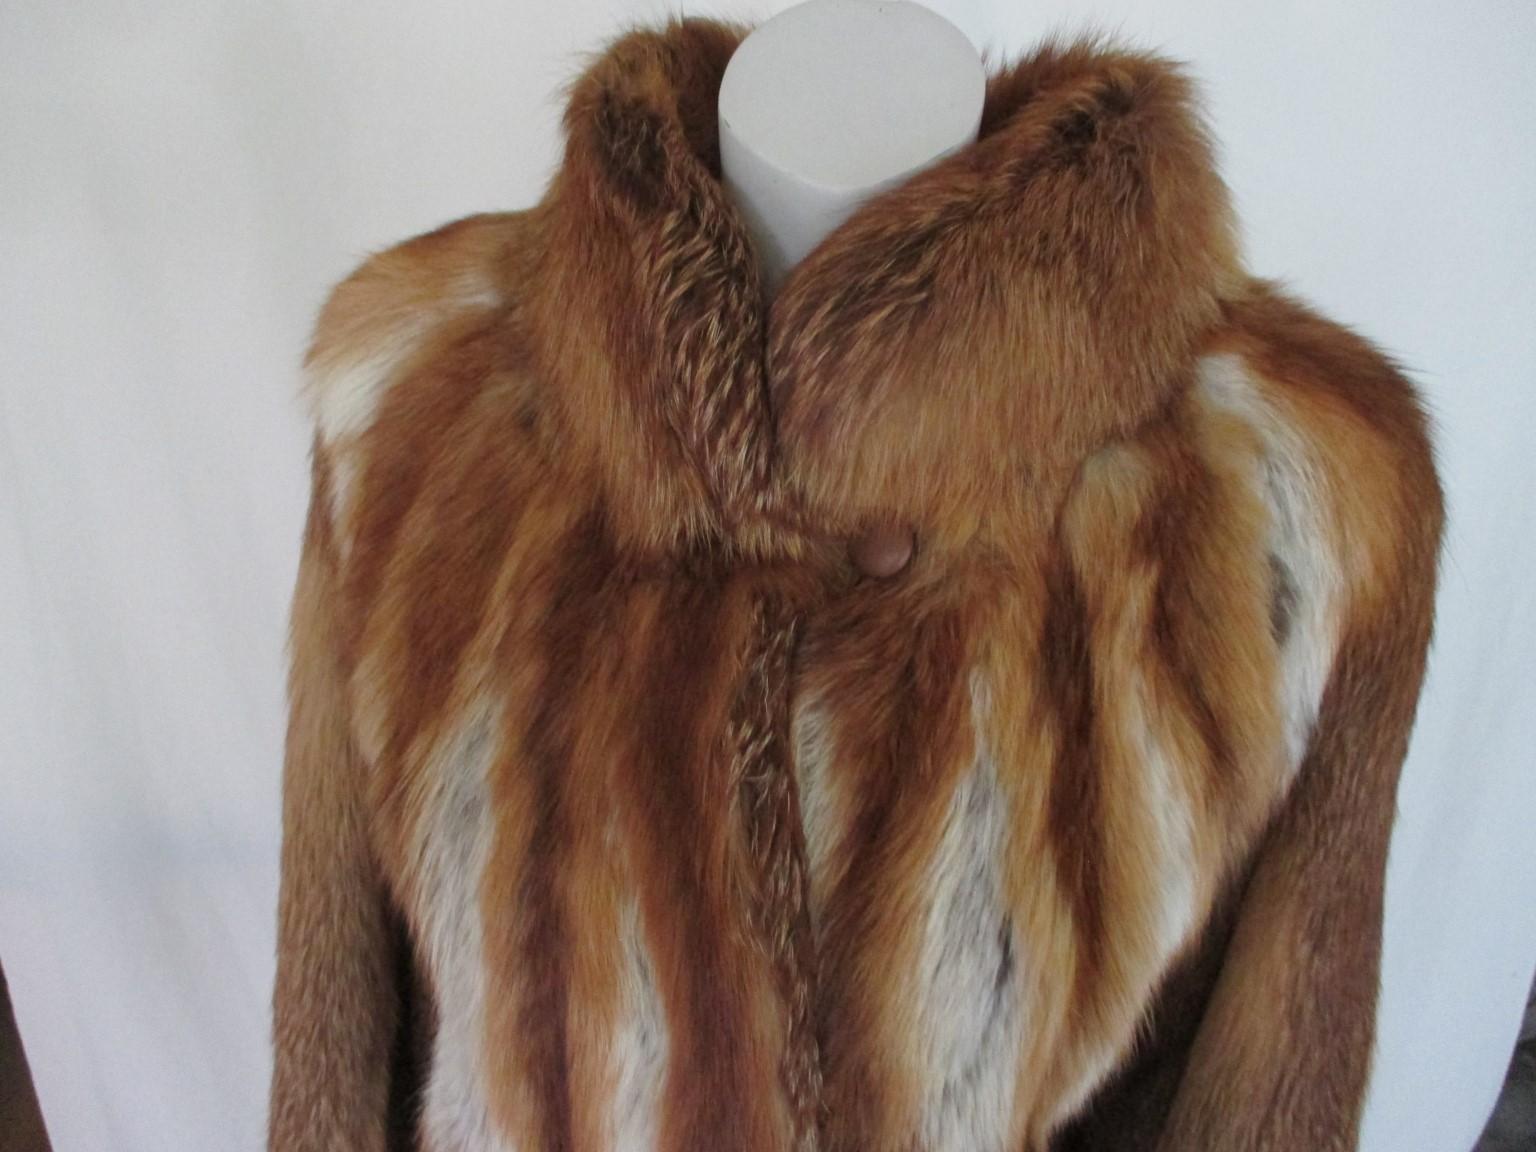 Beautiful vintage soft red fox fur coat

We offer more exclusive fur coats, view our fronstore

Details:
with 2 pockets, 1 leather button at collar and 4 closing hooks.
Fully lined with flowers
Can be worn by men or women.
Size is about medium to